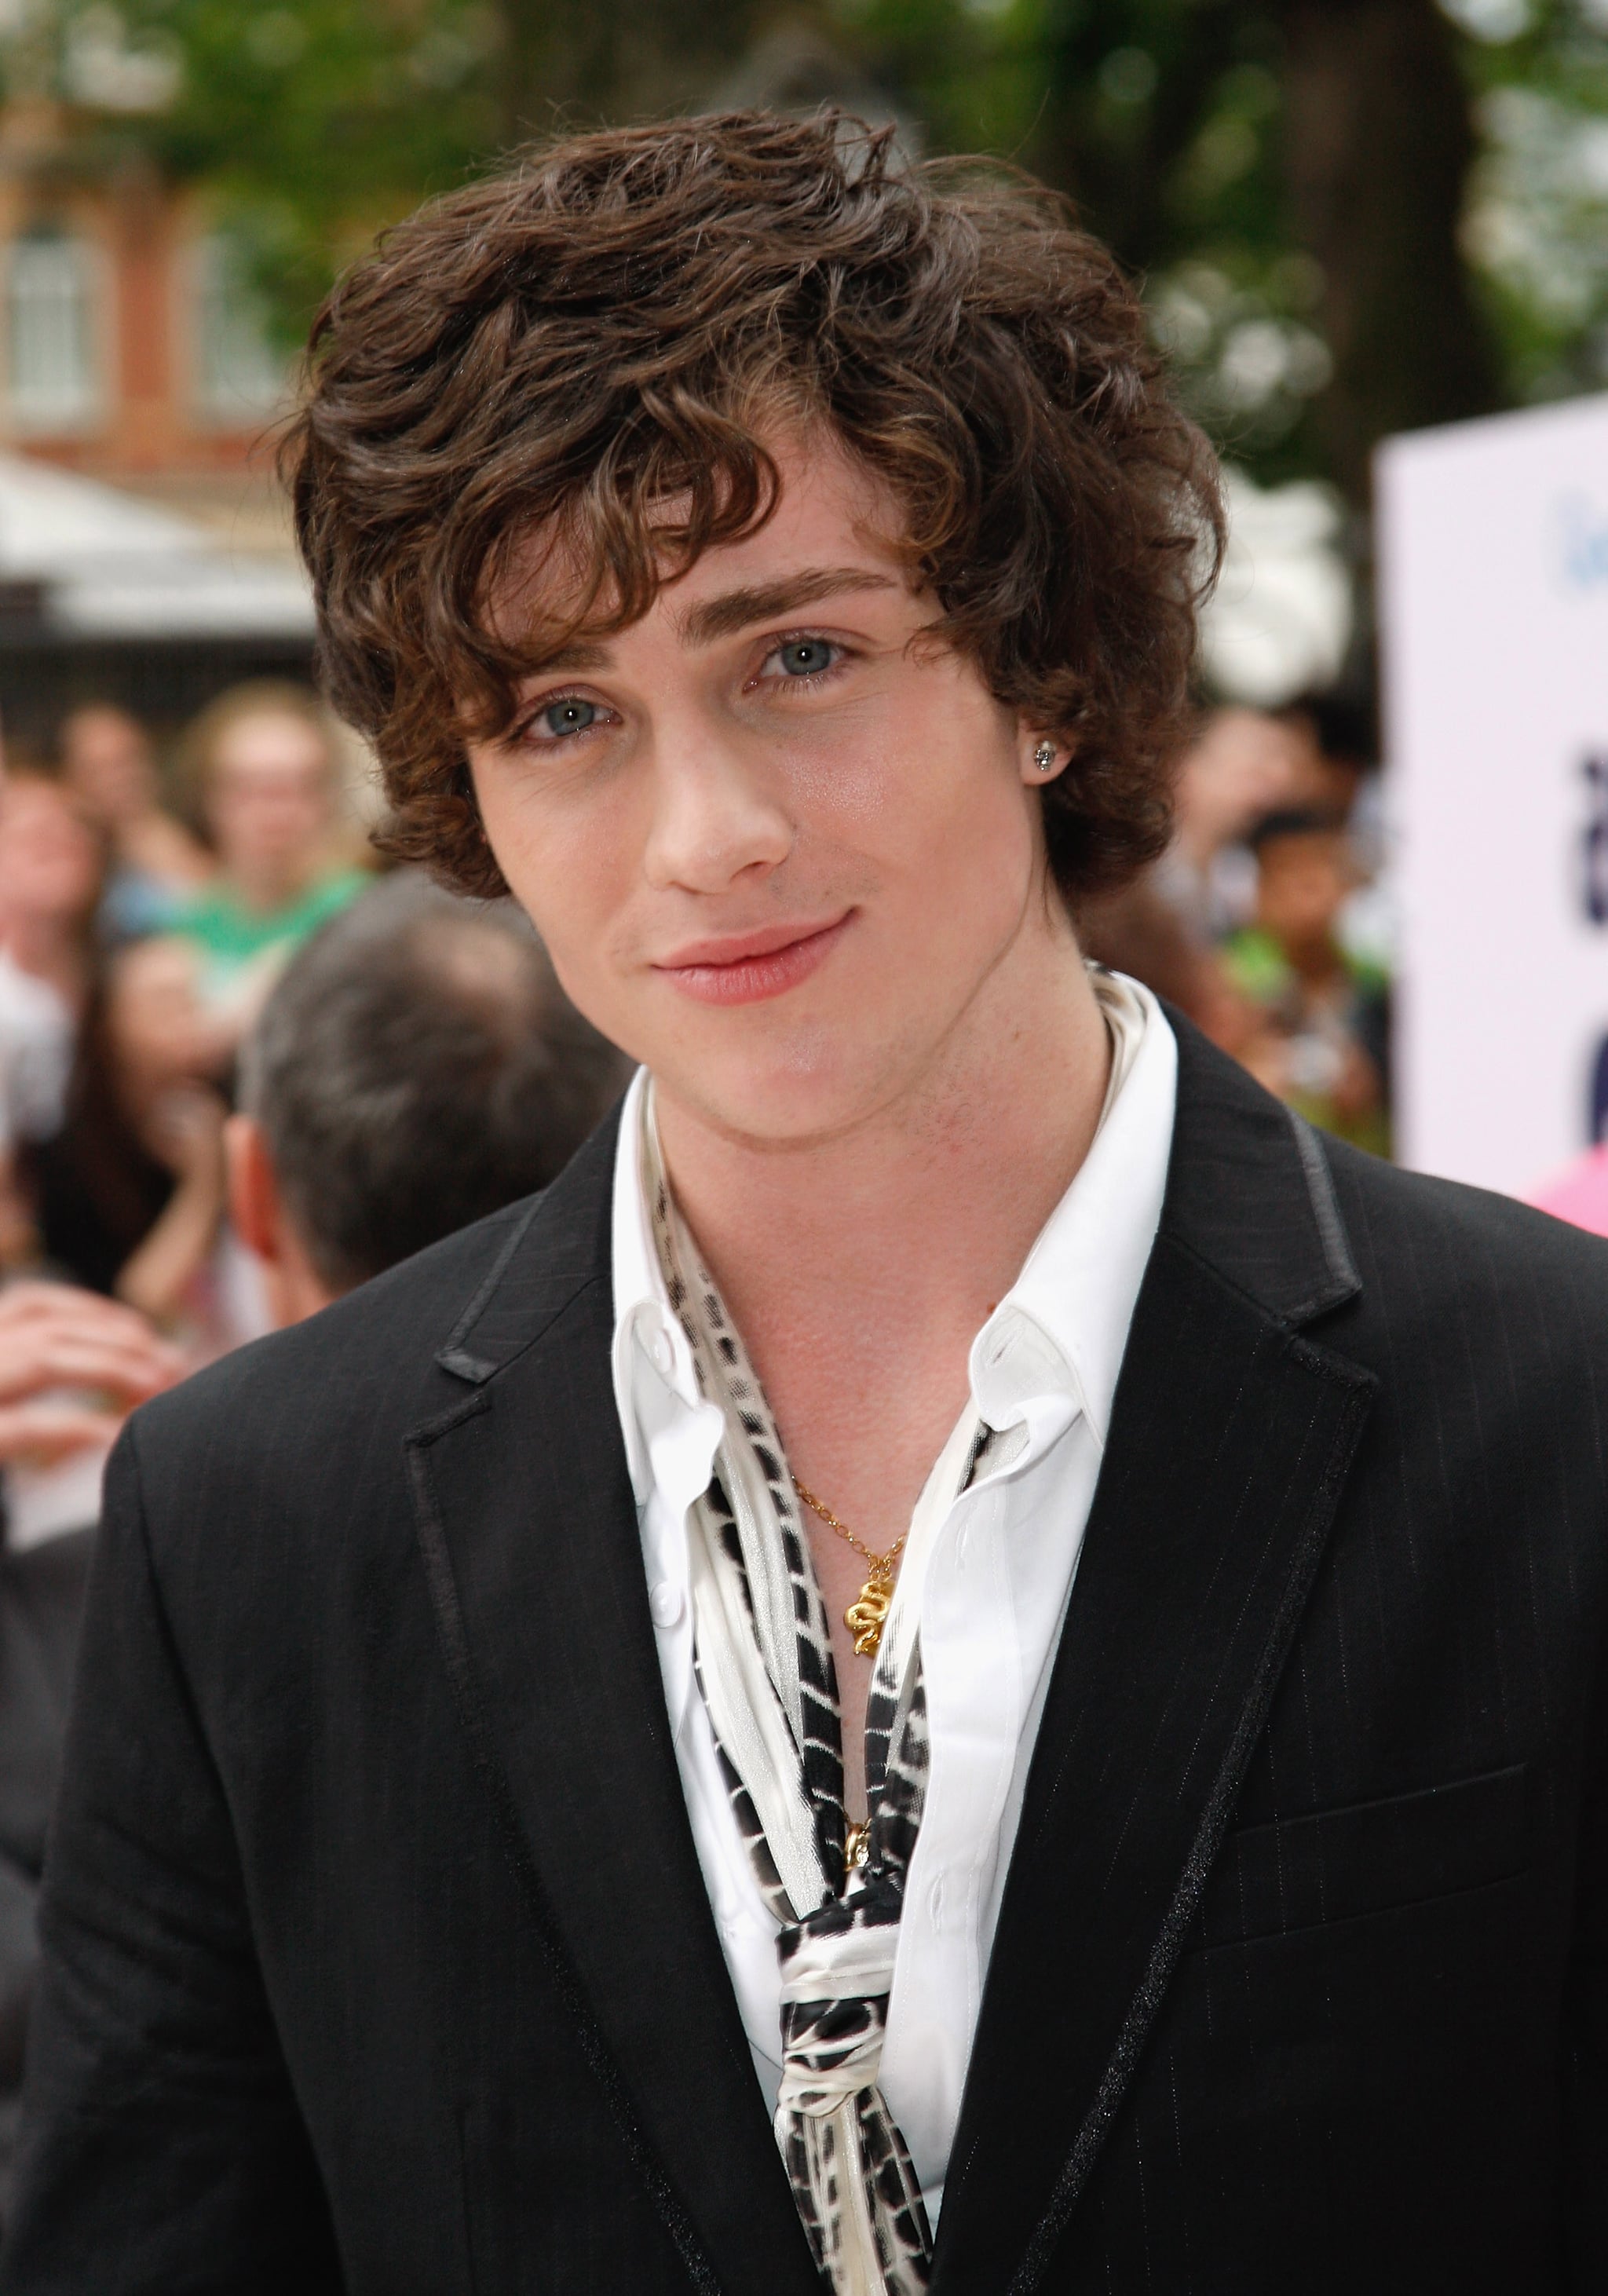 LONDON - JULY 16:  Actor Aaron Johnson attends the Angus, Thongs and Perfect Snogging film premiere held at the Empire Leicester Square on July 16, 2008 in London, England.  (Photo by Jon Furniss/WireImage)